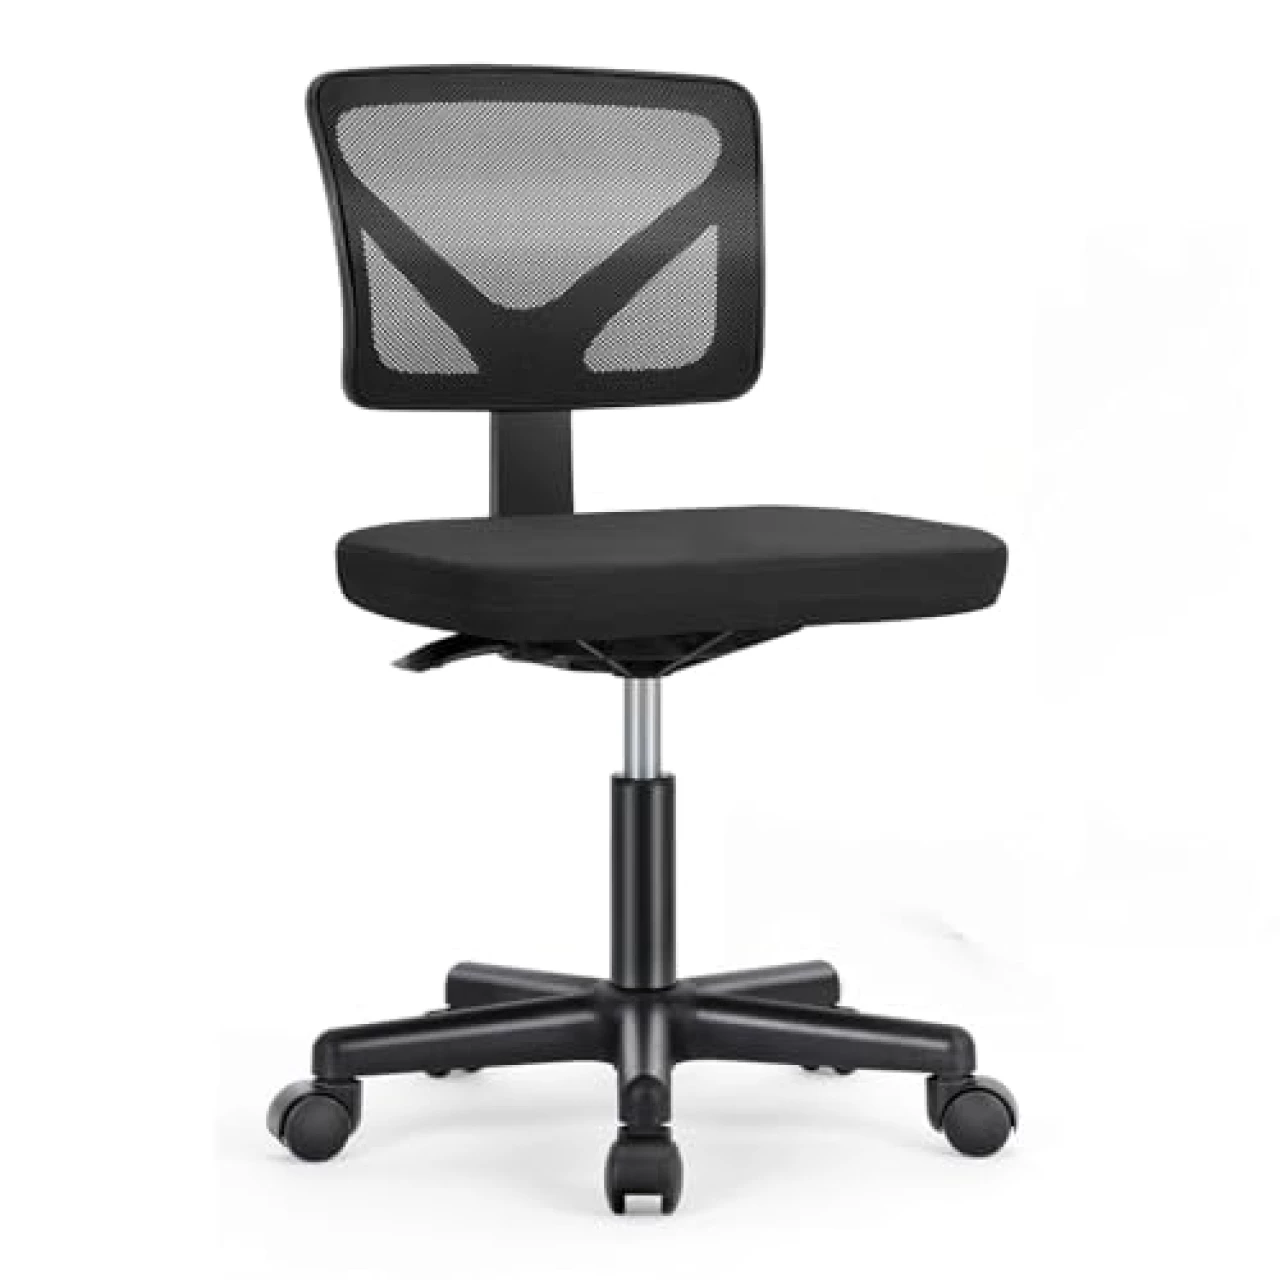 Sweetcrispy Armless Desk Chair - Small Home Office Chair with Wheels